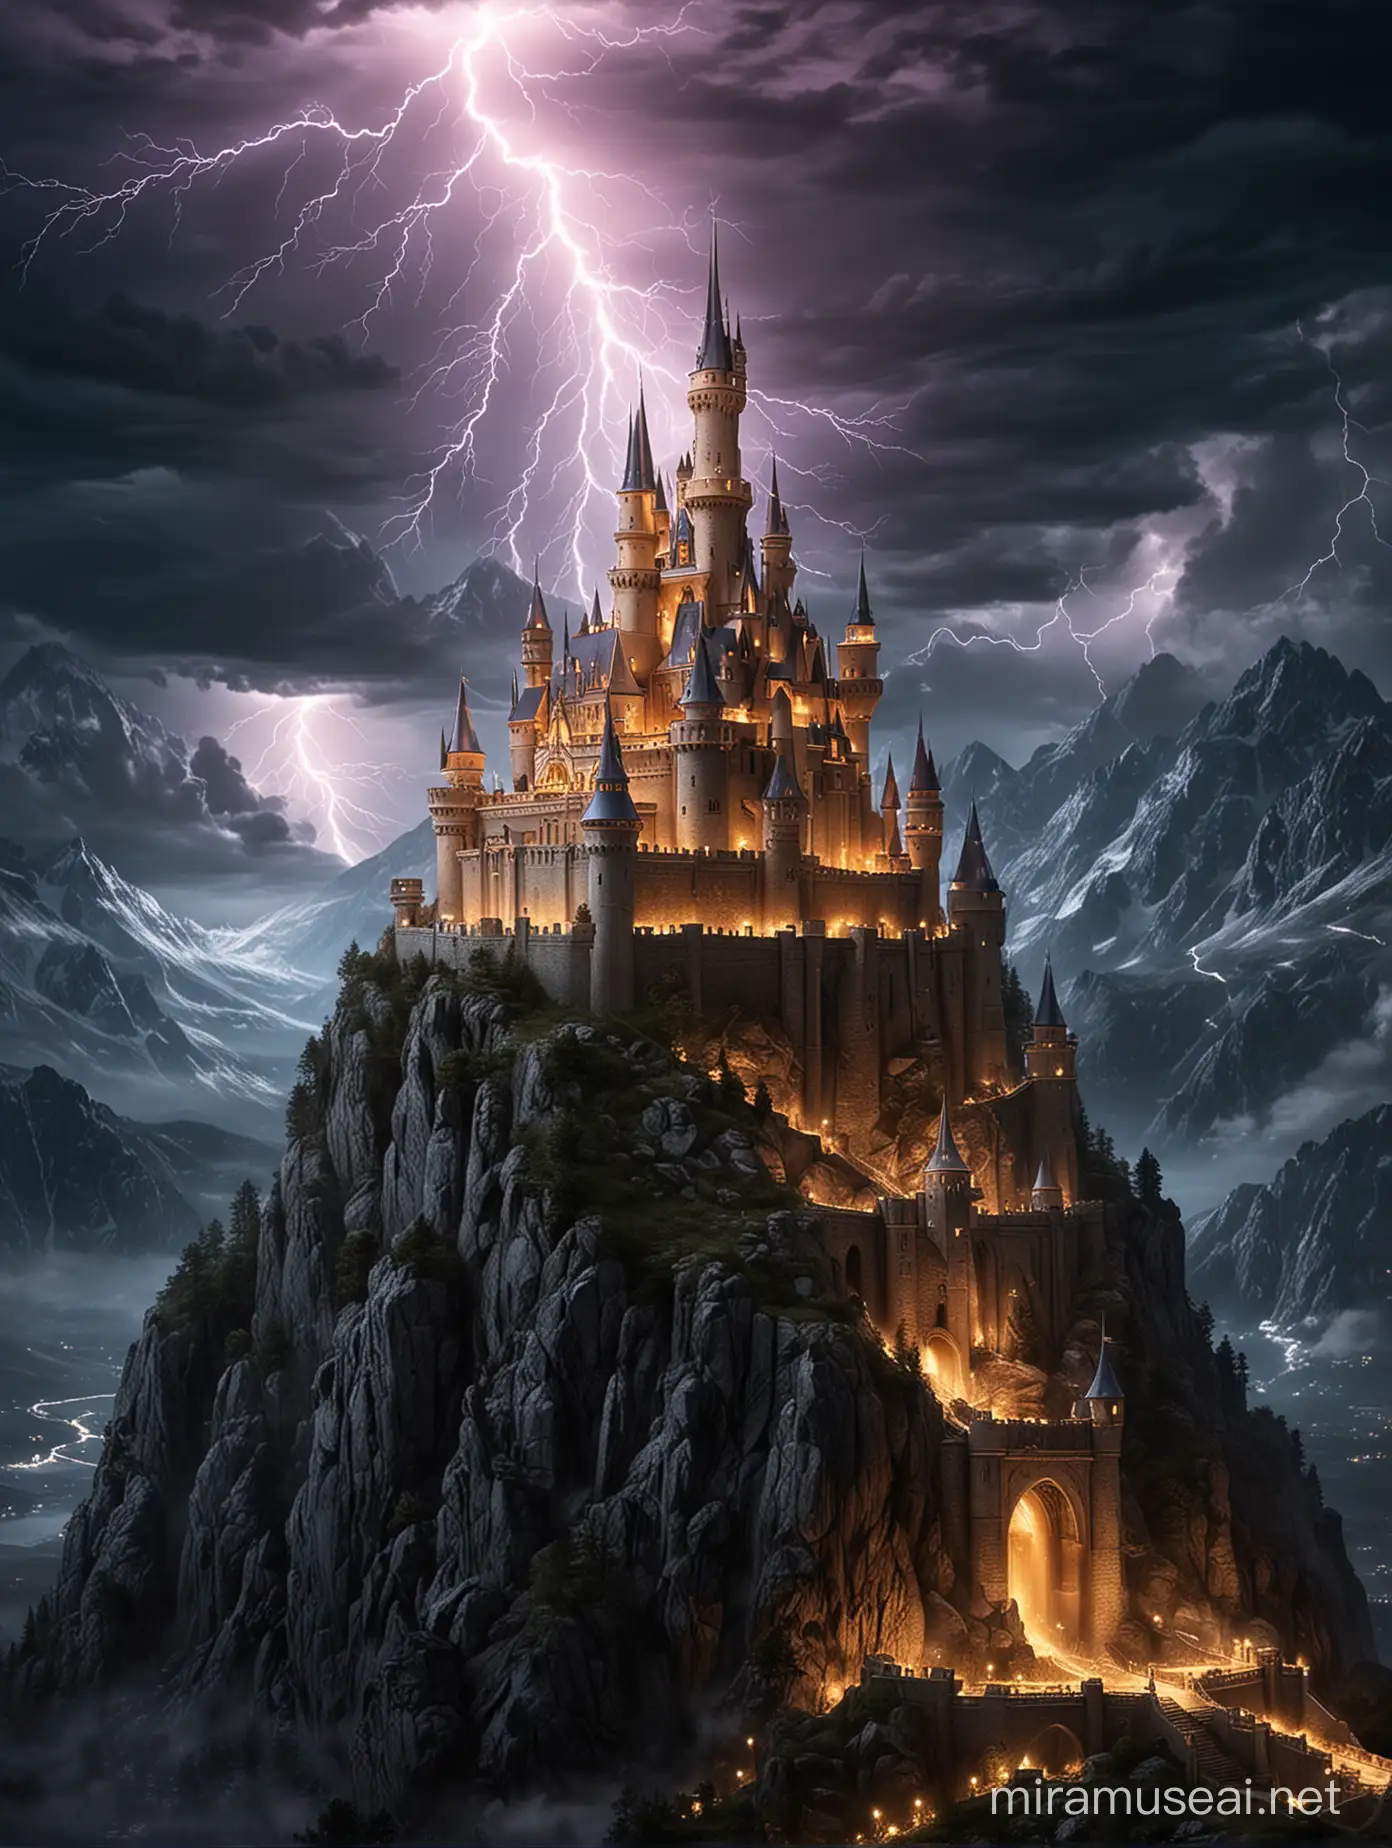 pic of  a lighting castle it will be sturk by lightning and it is fantasy and it will be in the mountains